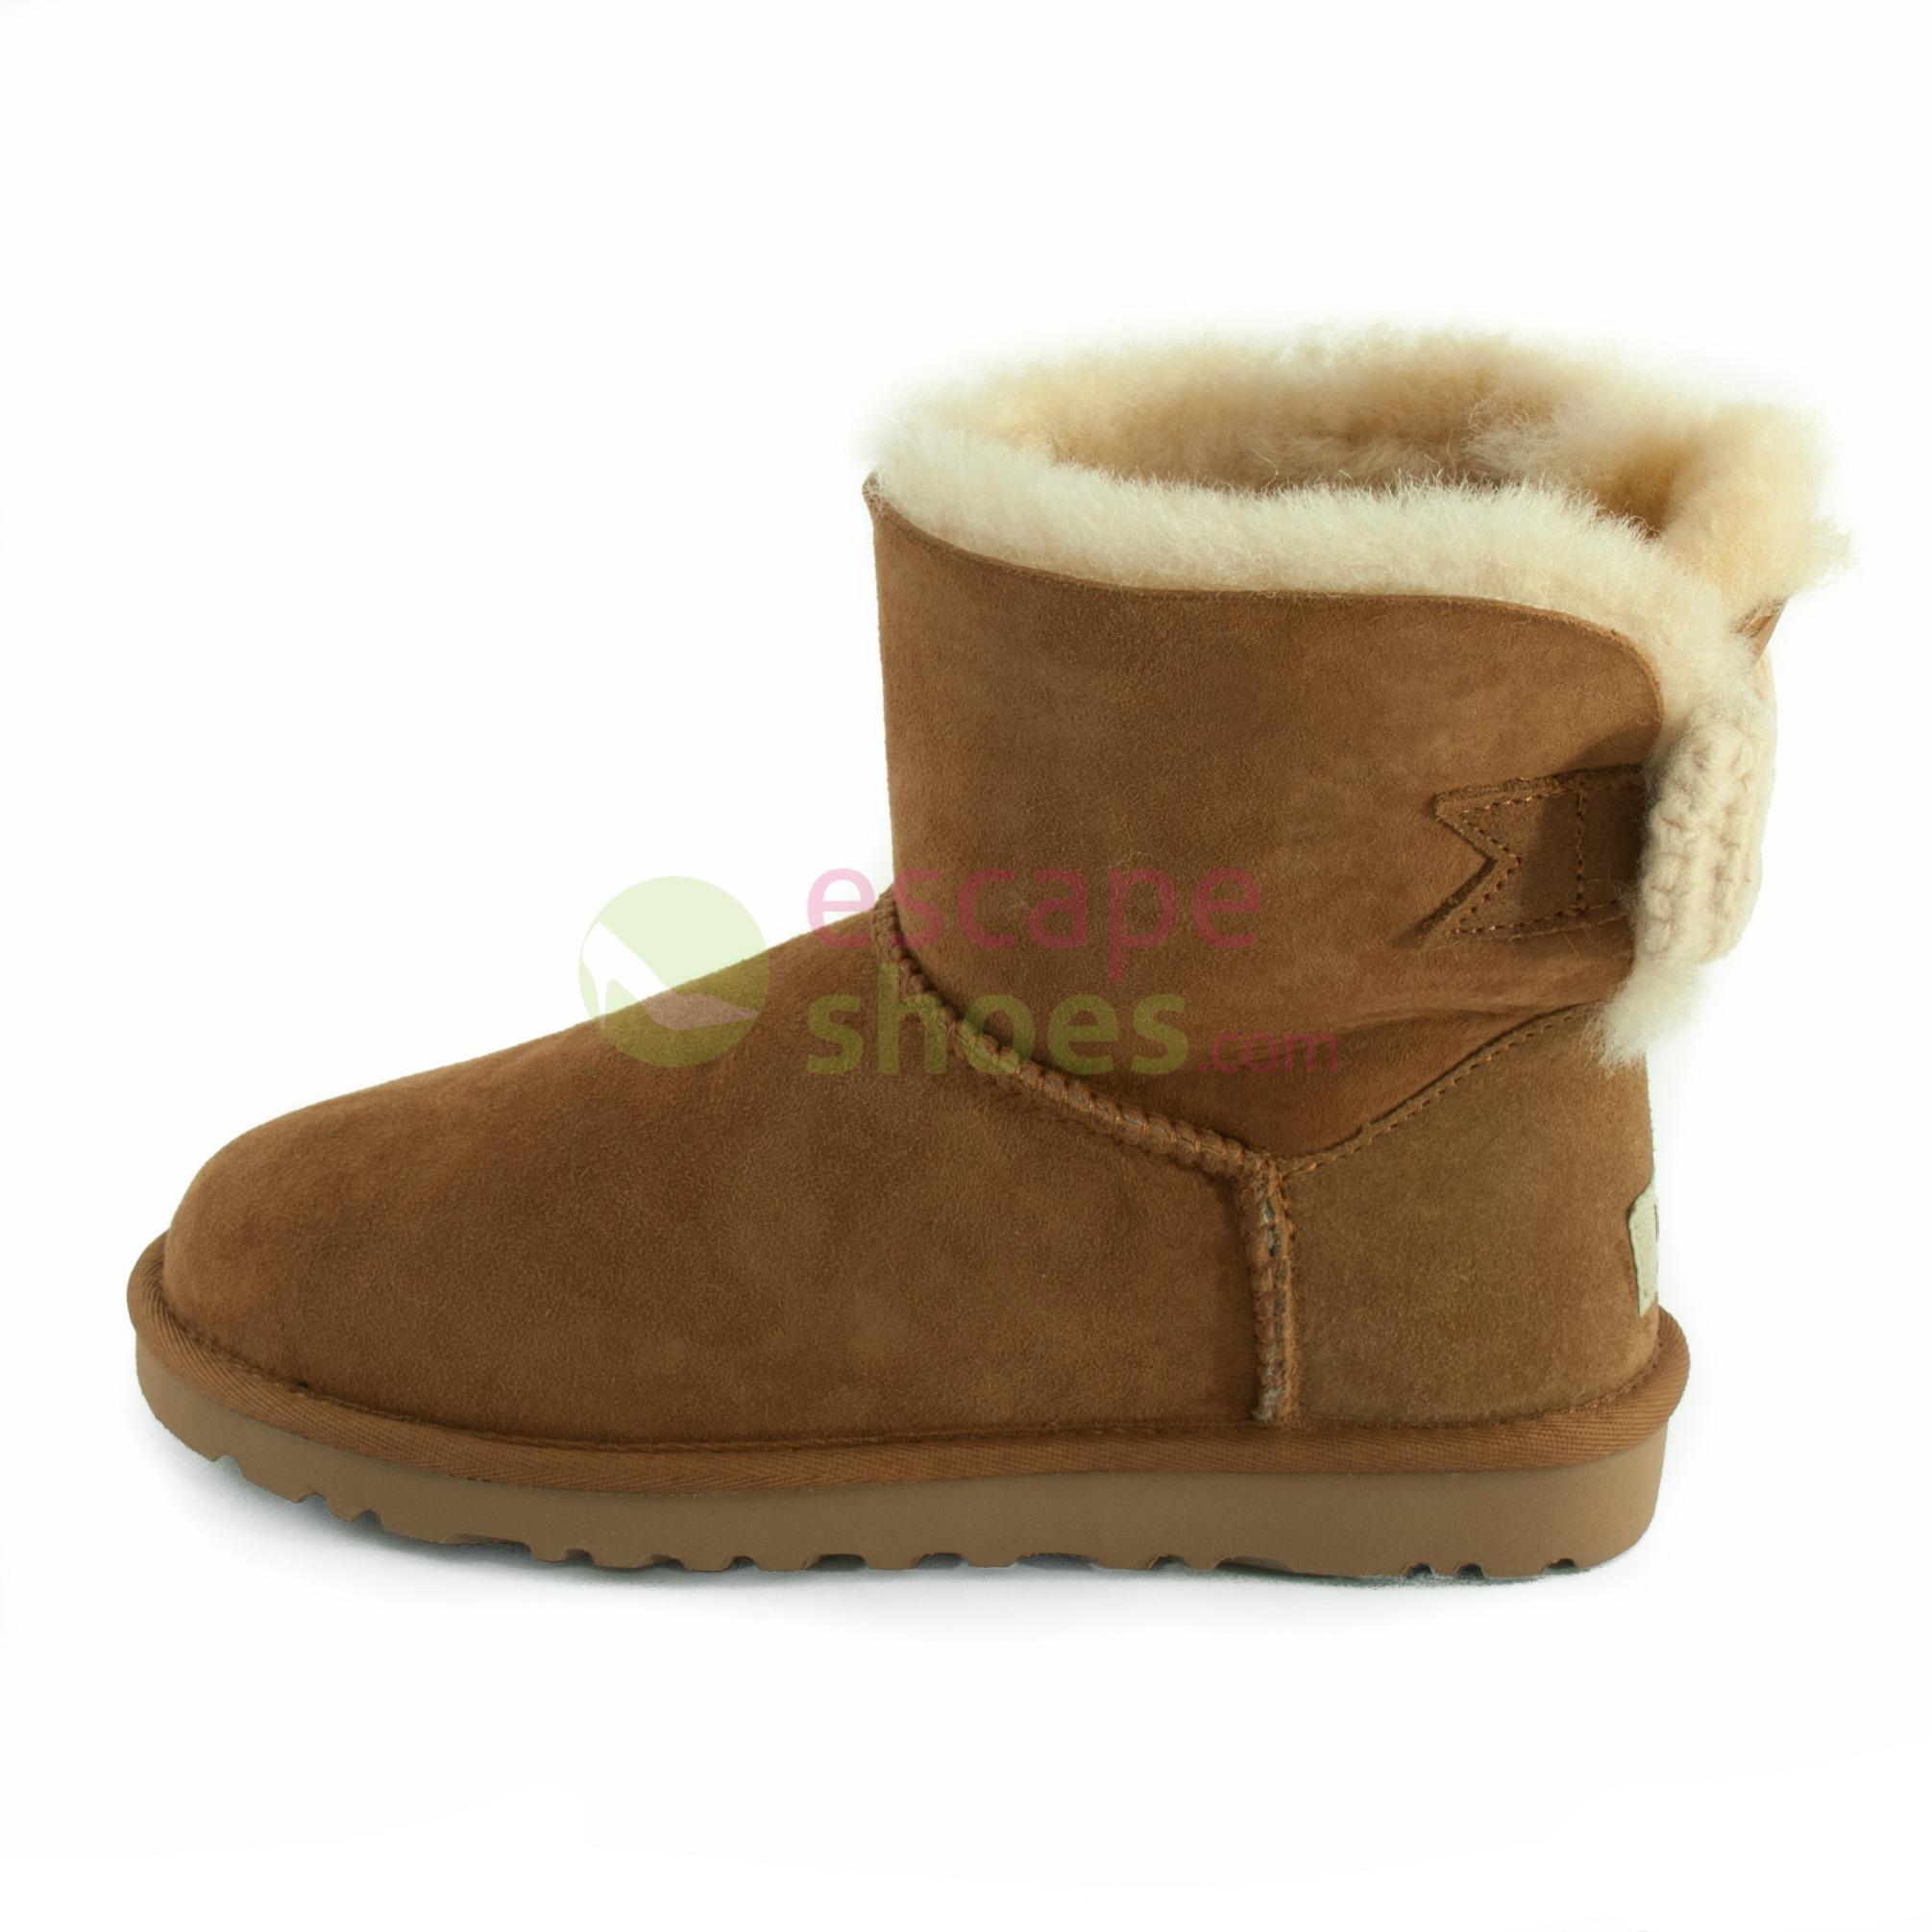 ugg bailey knit bow